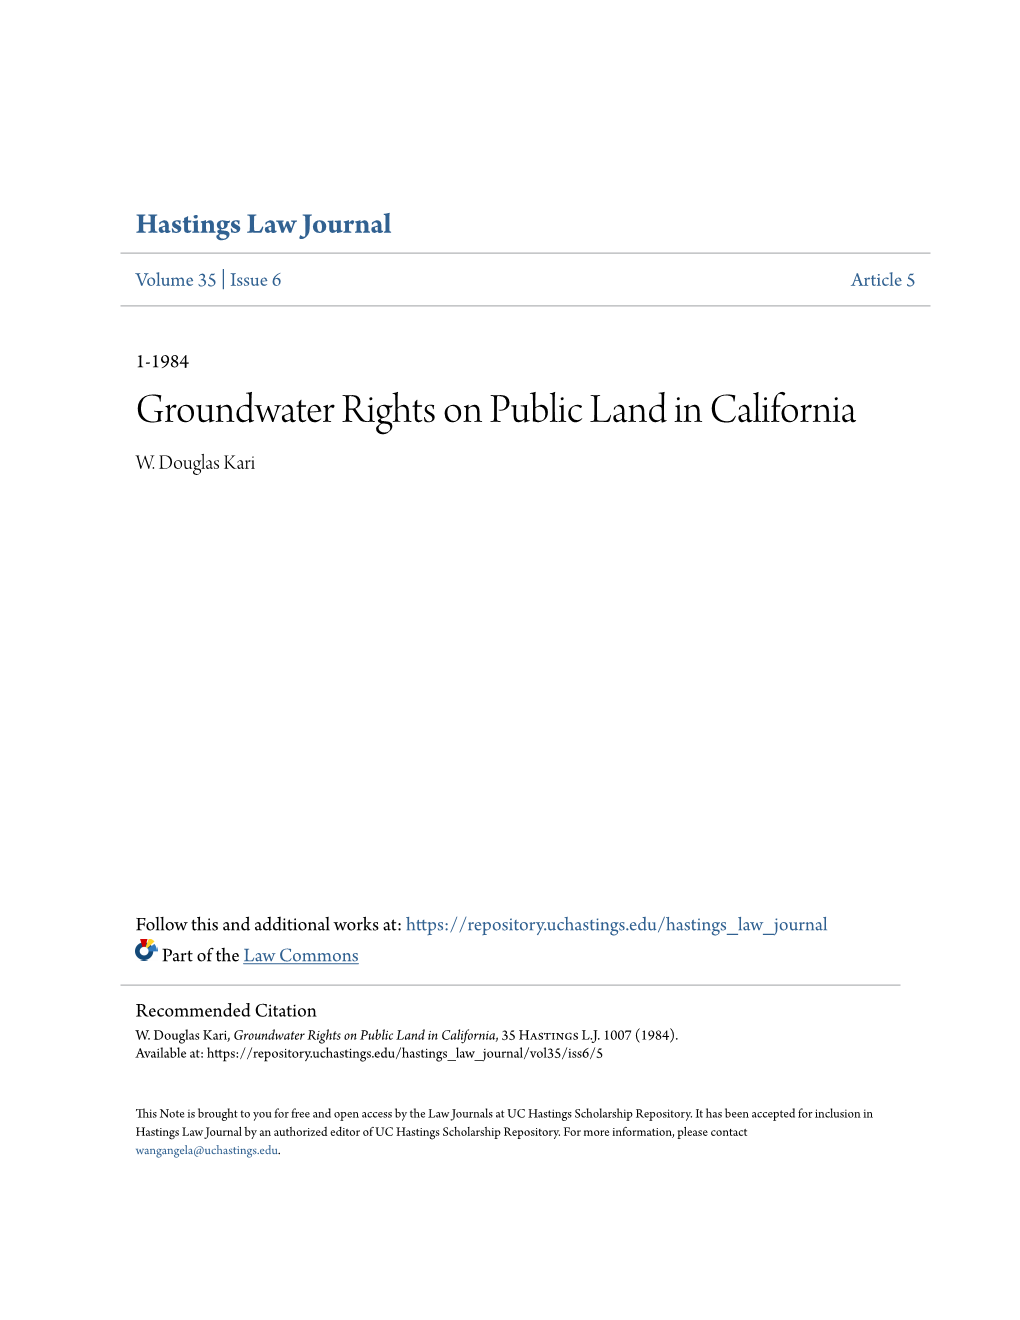 Groundwater Rights on Public Land in California W